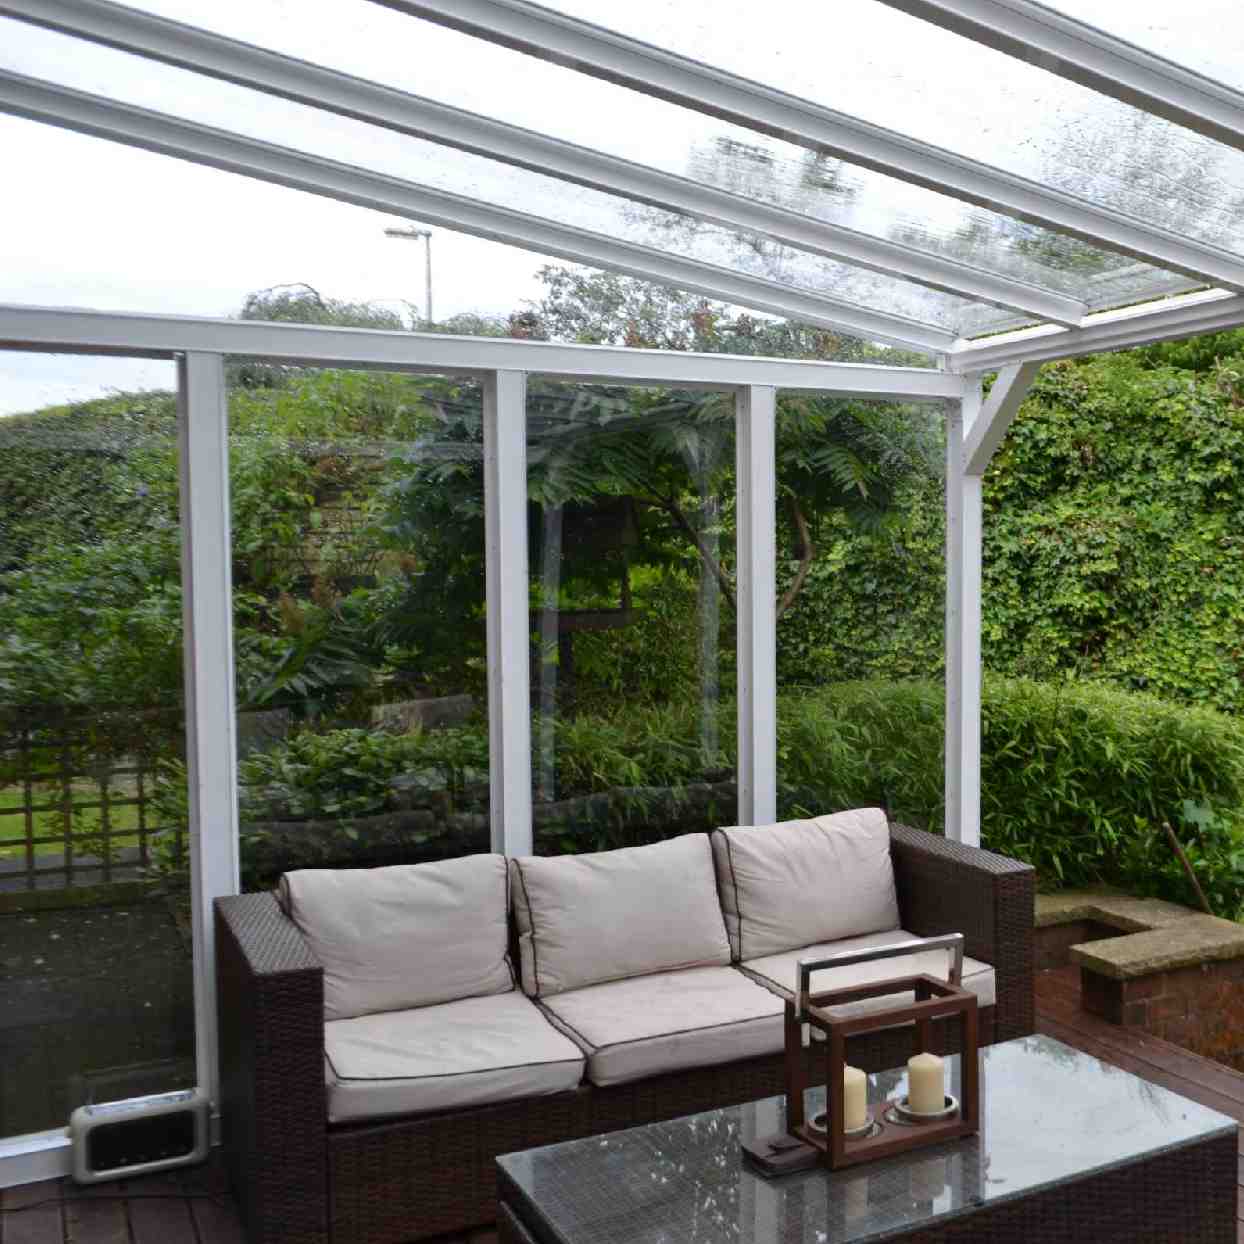 Buy Omega Verandah White with 16mm Polycarbonate Glazing - 10.6m (W) x 3.0m (P), (5) Supporting Posts online today